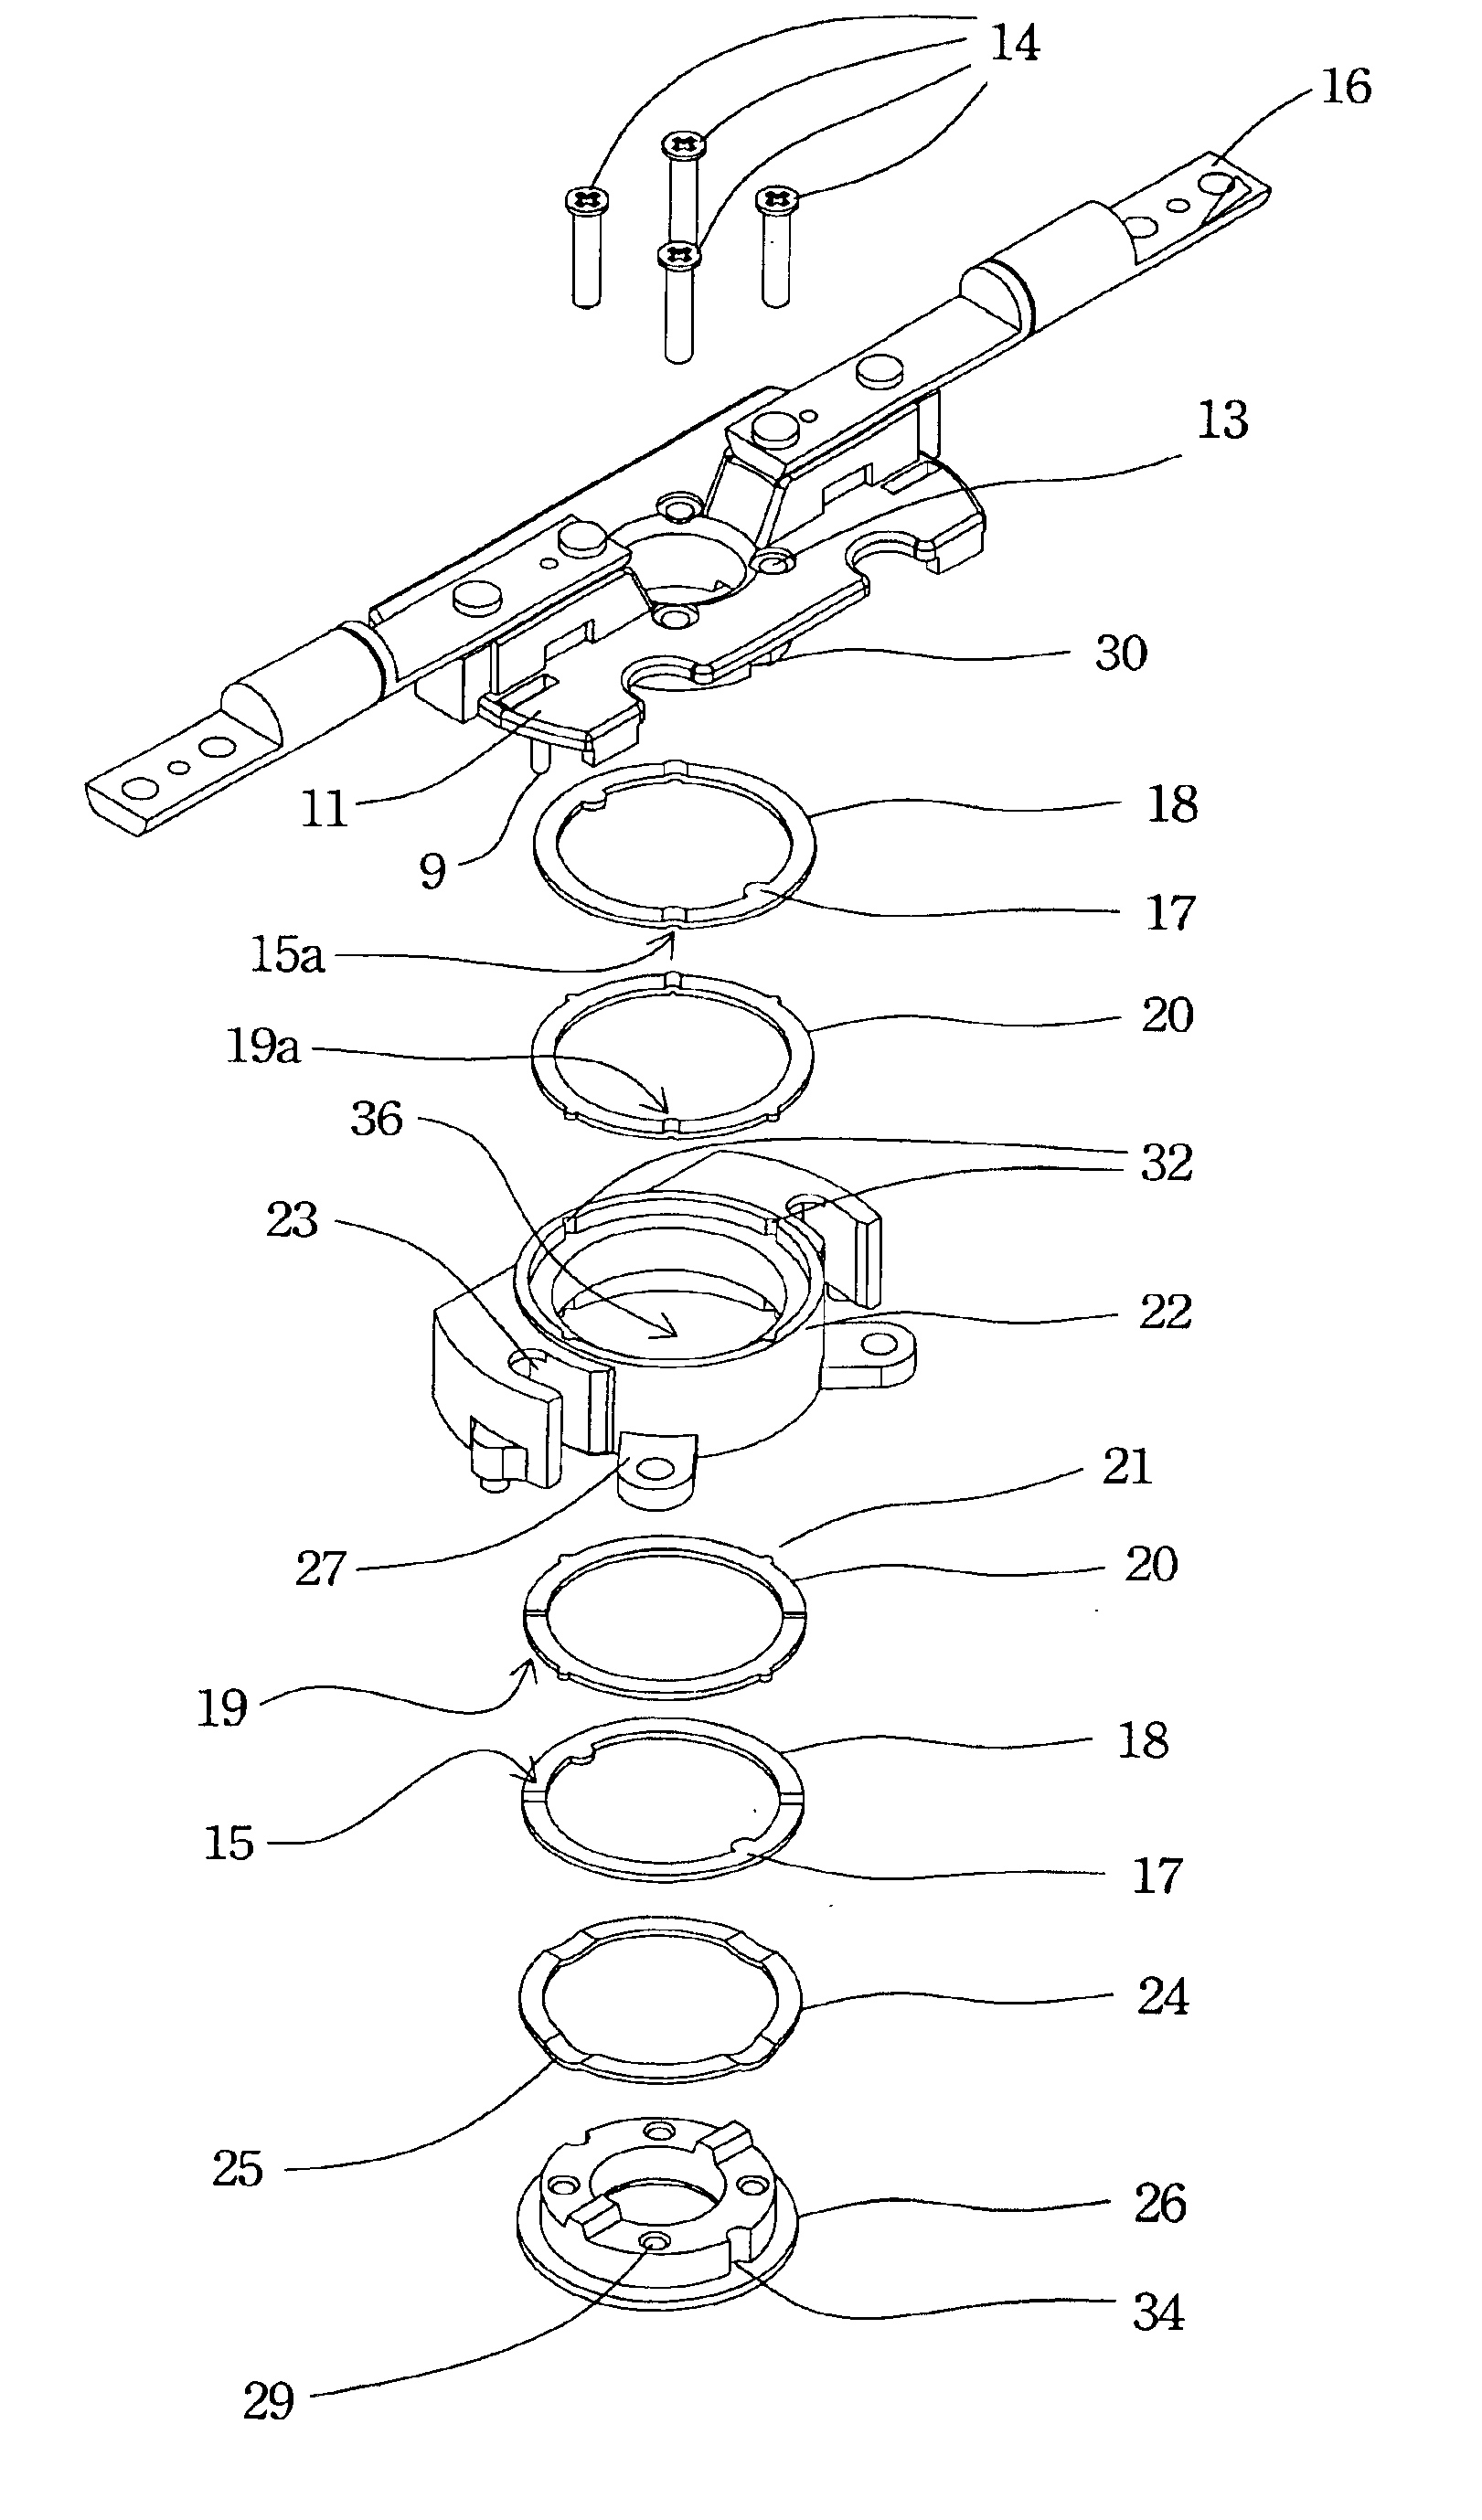 Swivel hinge with angular fixing structure